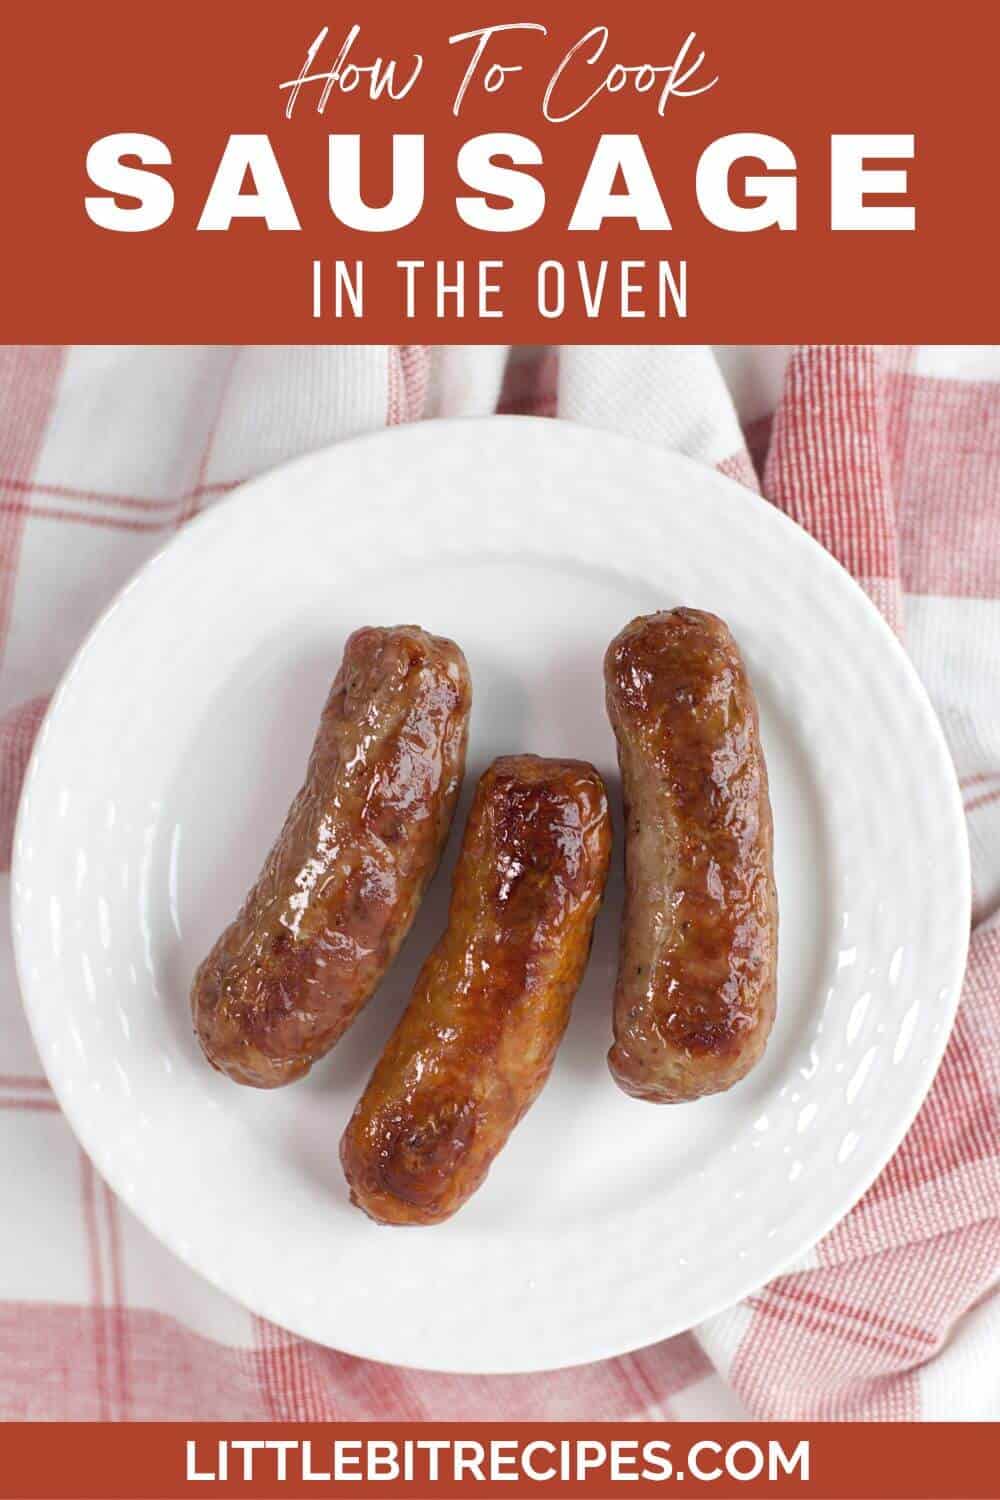 How to cook sausage in the oven.